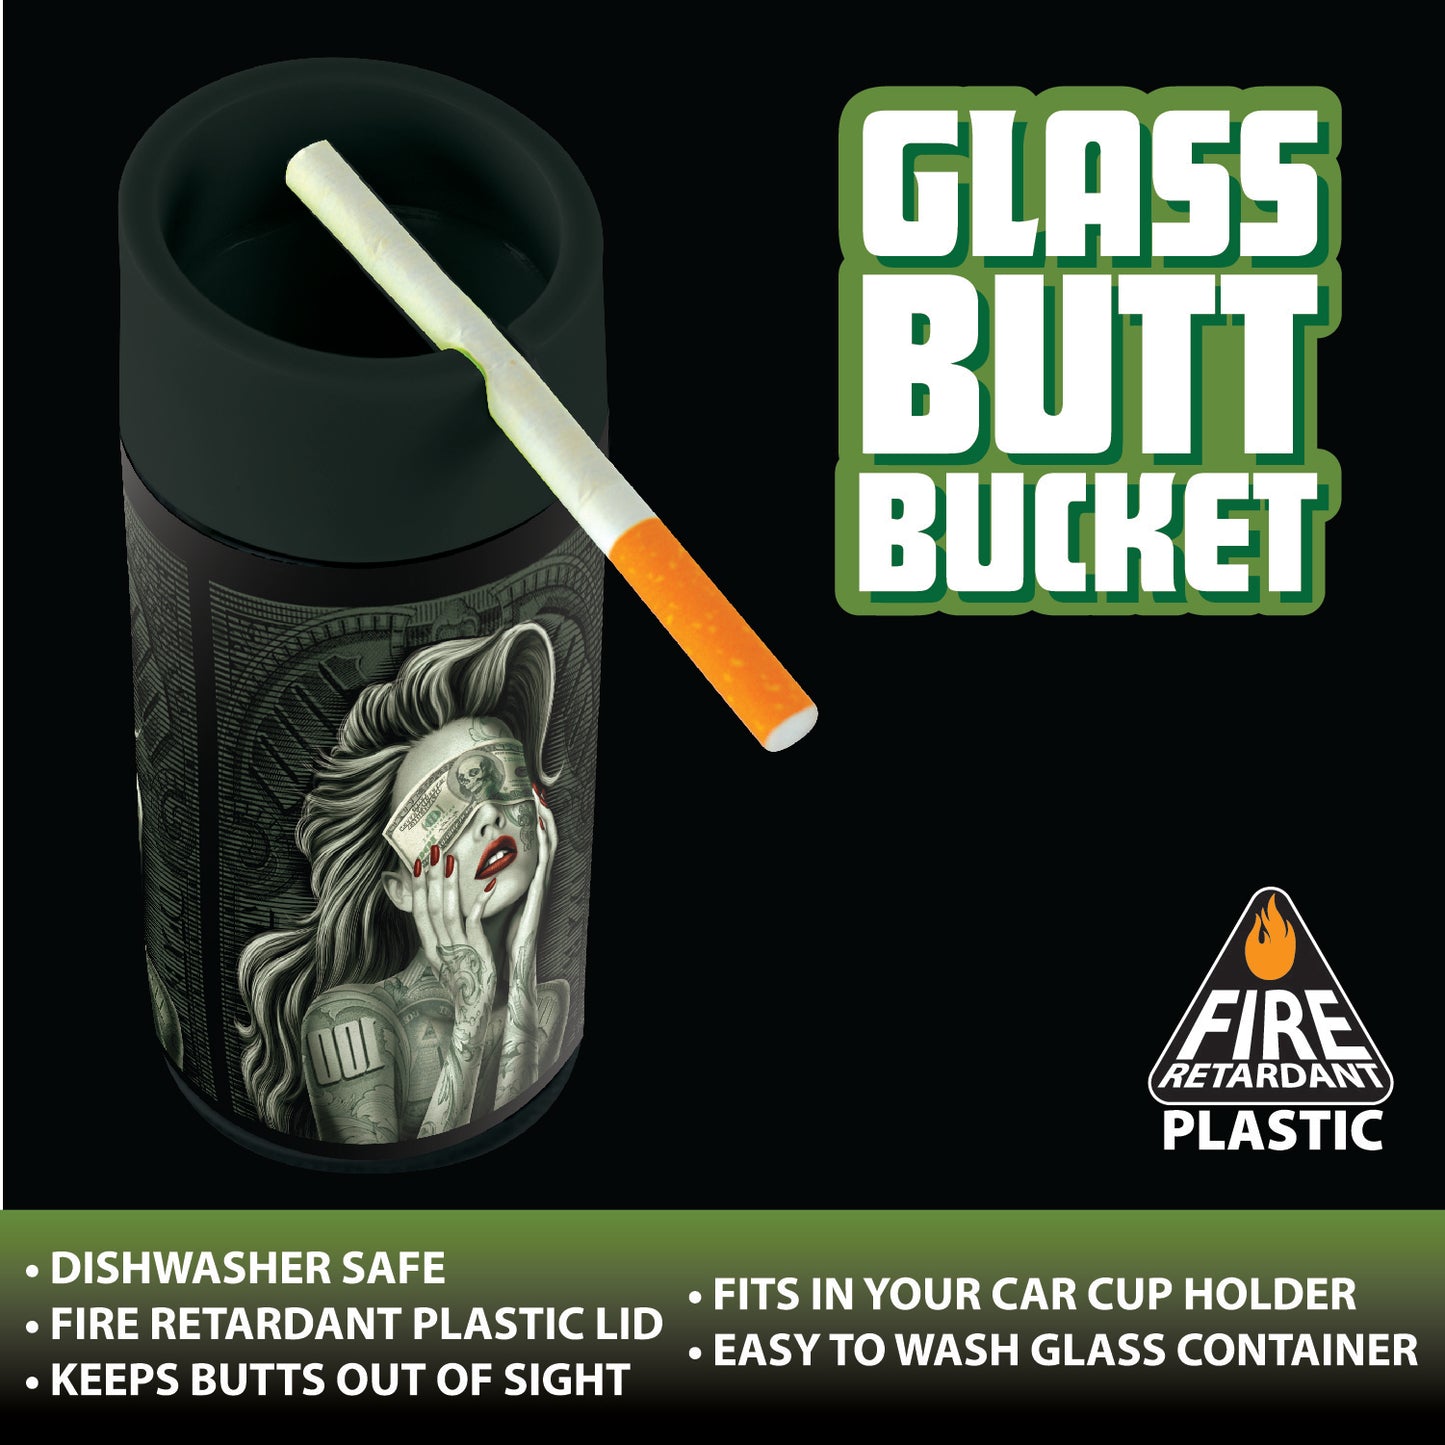 ITEM NUMBER 022589 GLASS BUTT BUCKET 6 PIECES PER DISPLAY